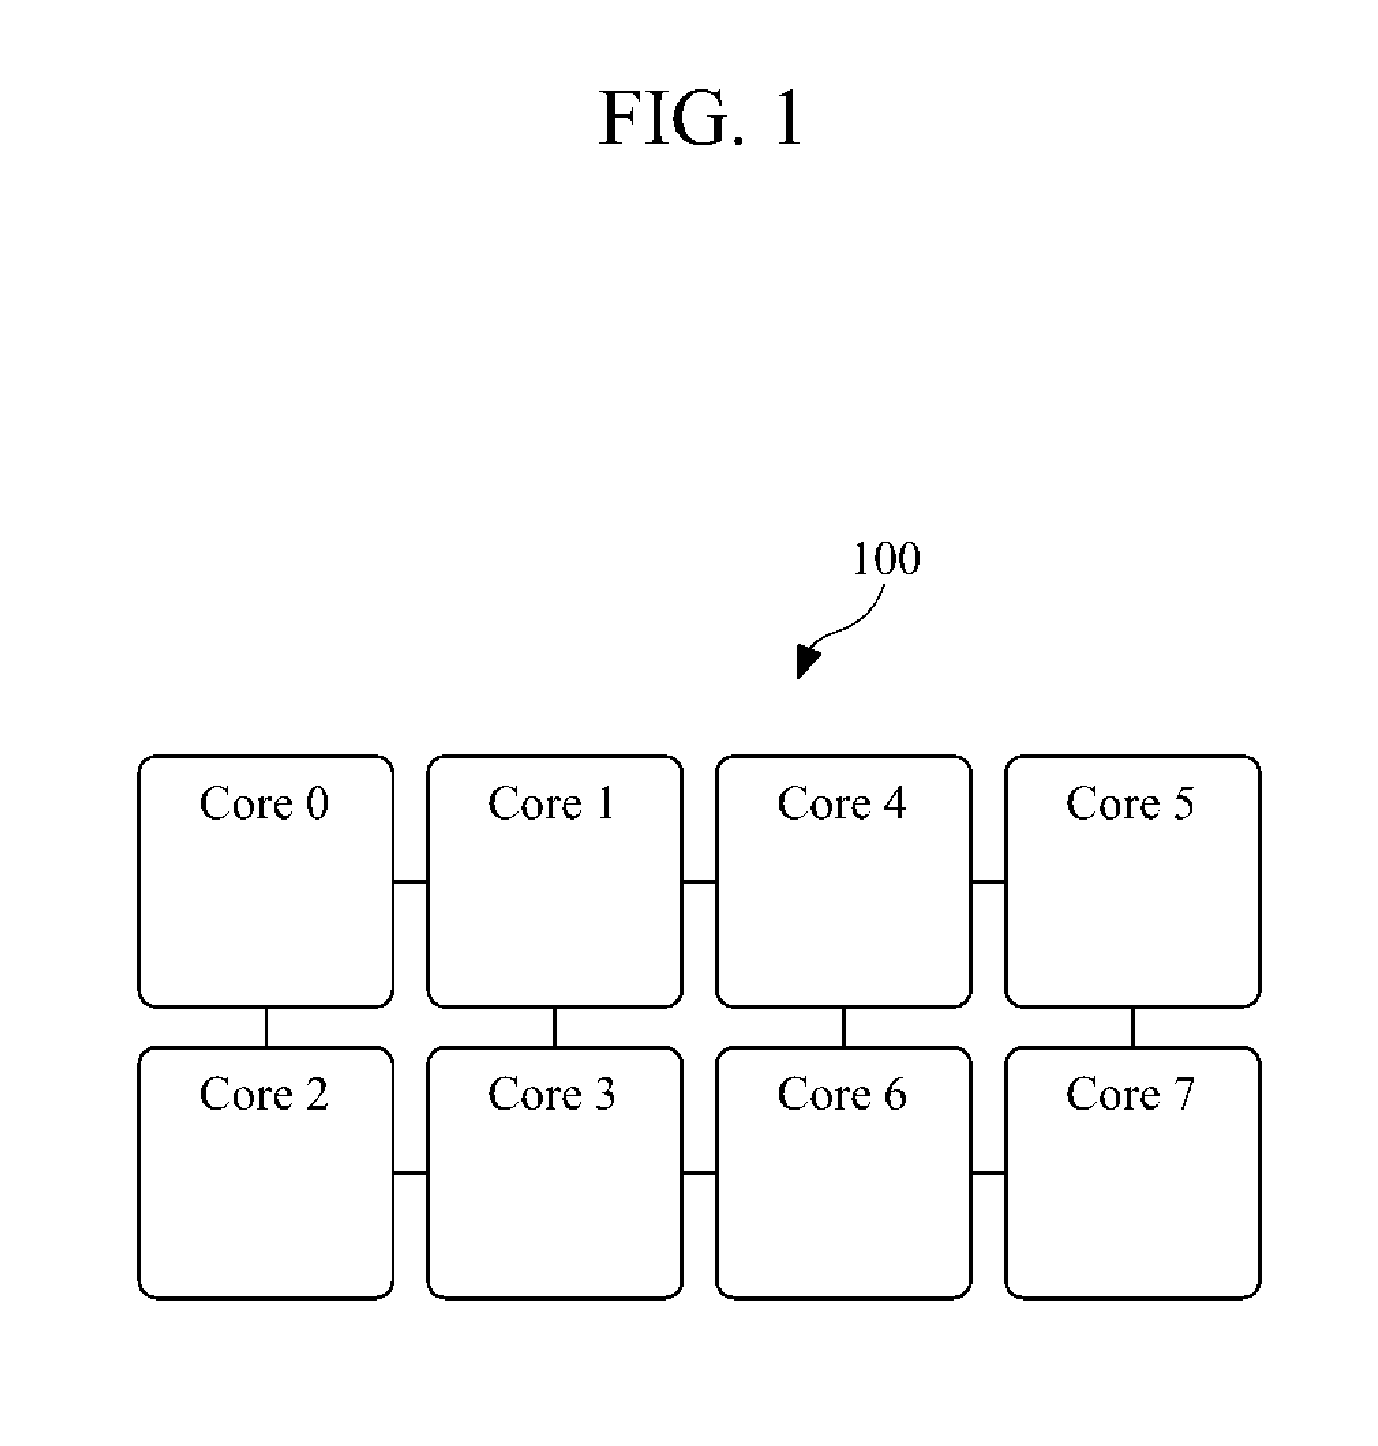 Compiling apparatus and method of a multicore device